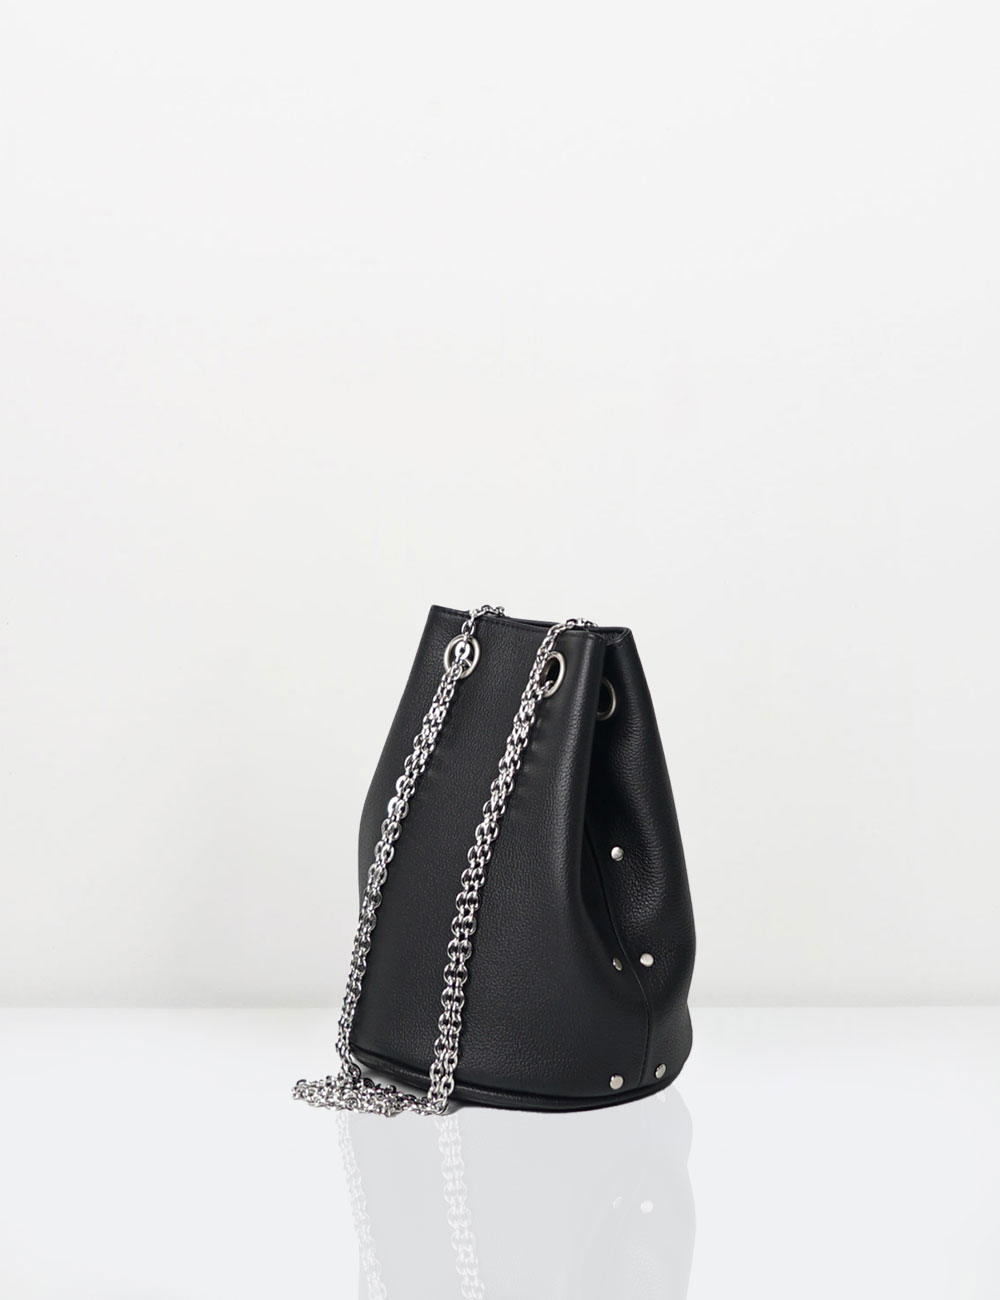 12mini chain bag / black (sold out)